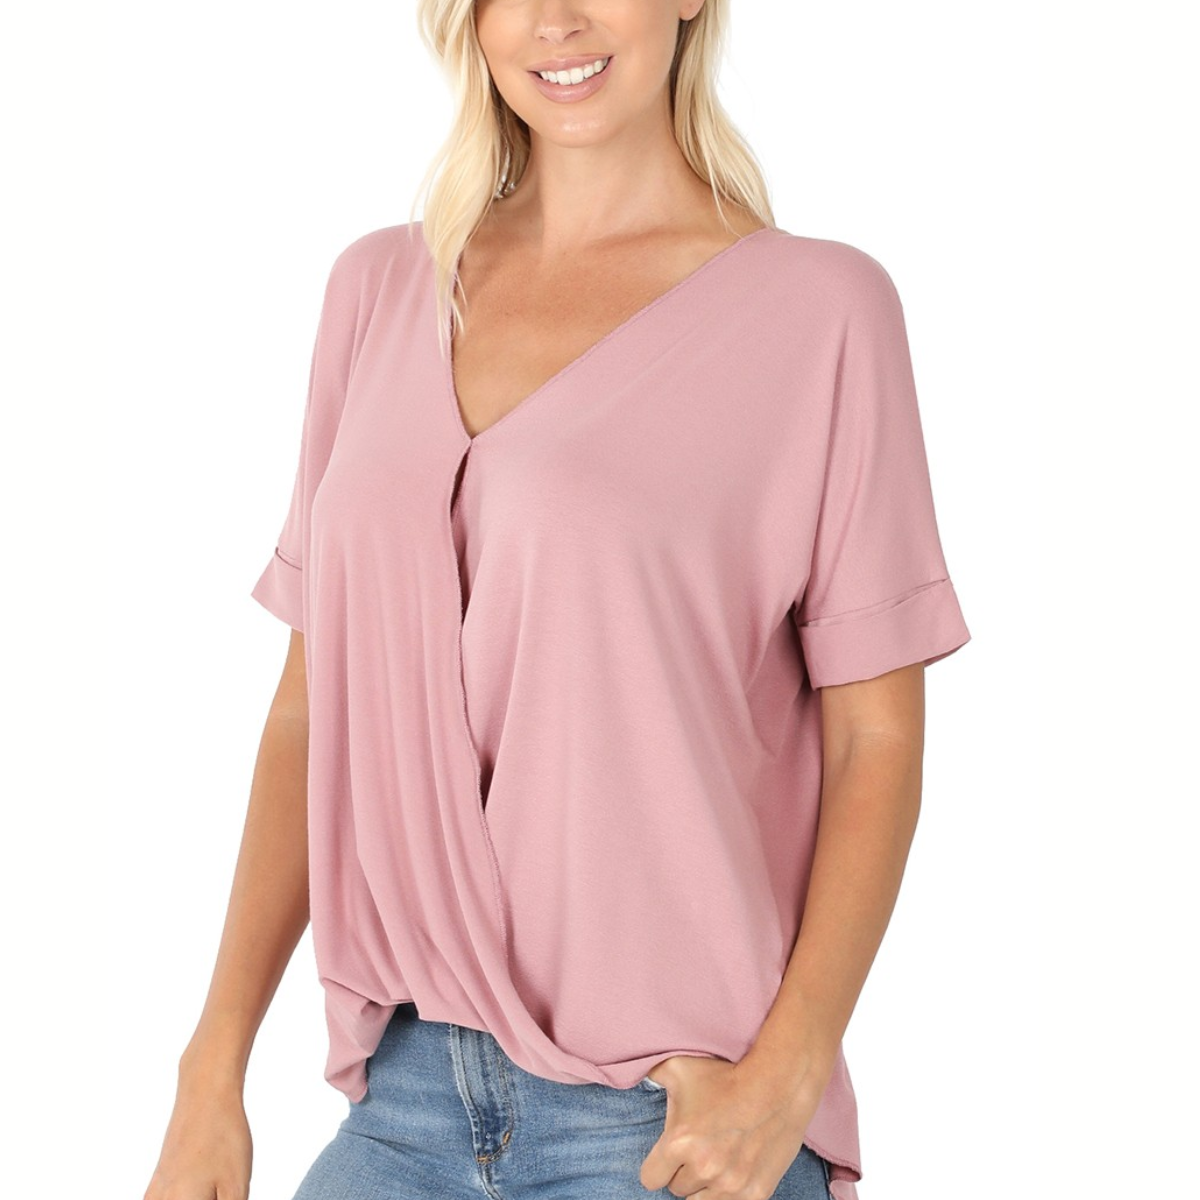 The model is wearing a FASHION GO Drape Front Layered-Look Top in Rose with a v-neck.